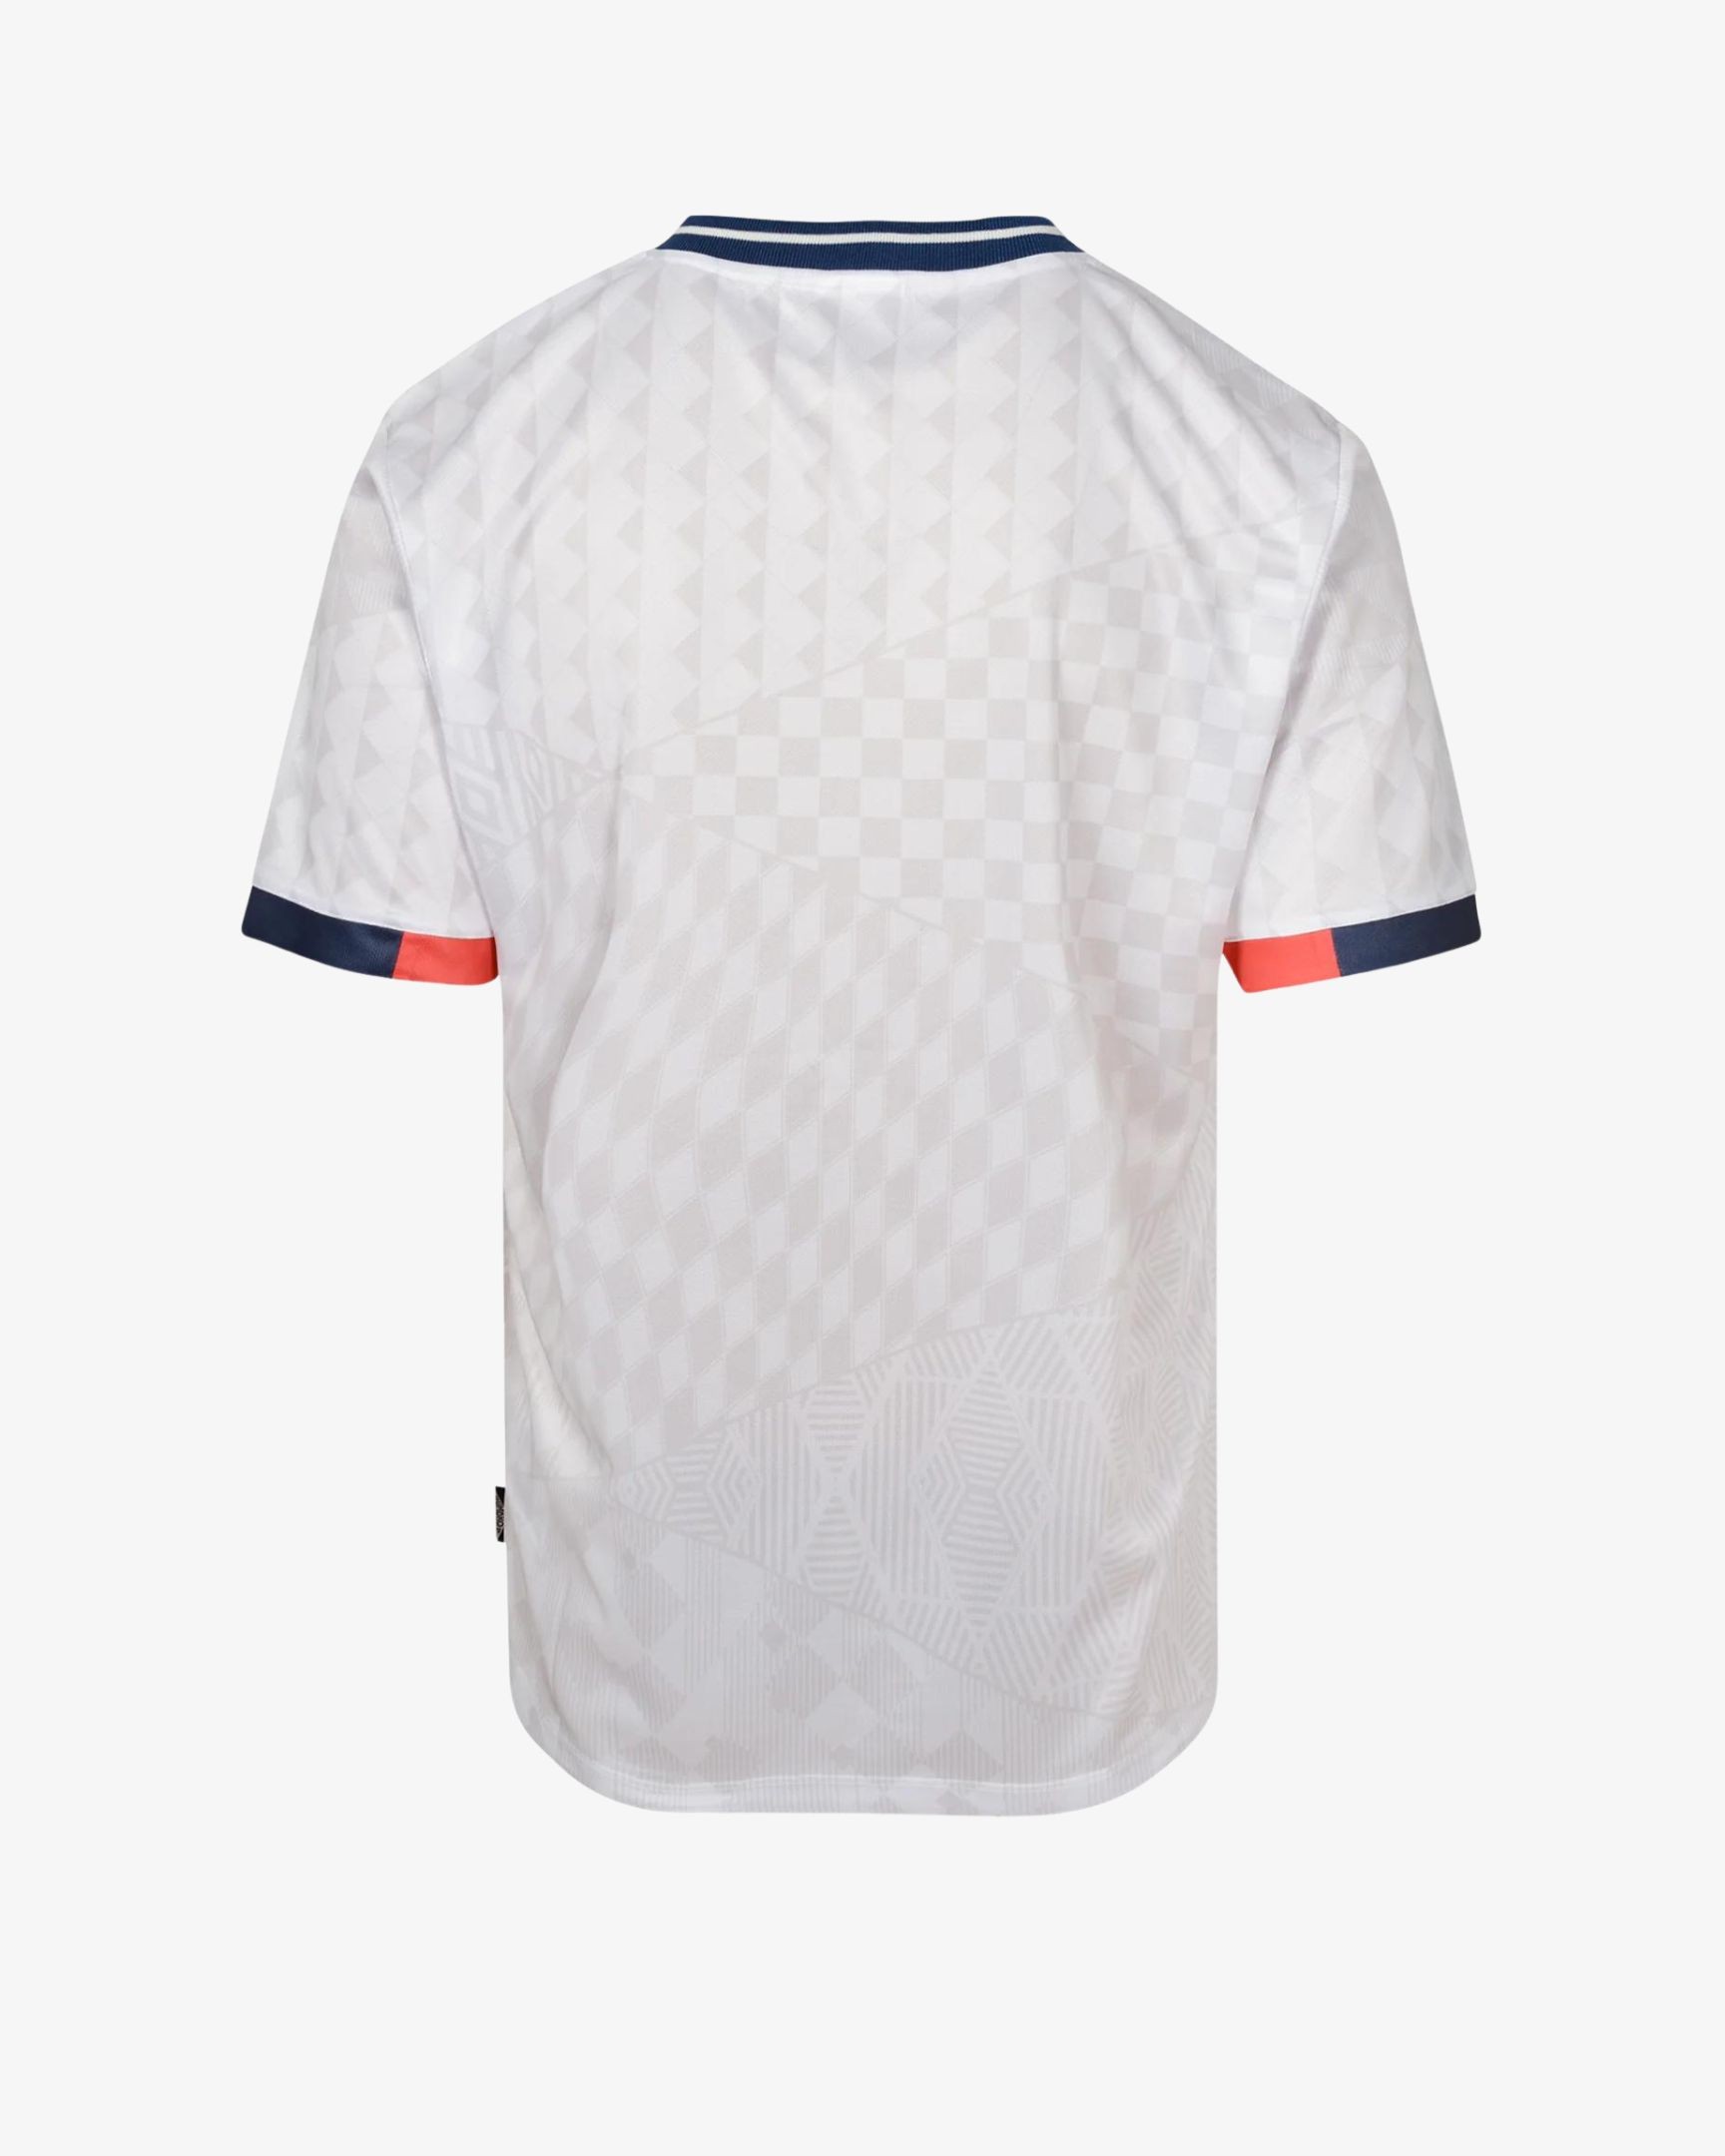 ENGLAND ICONIC GRAPHIC JERSEY